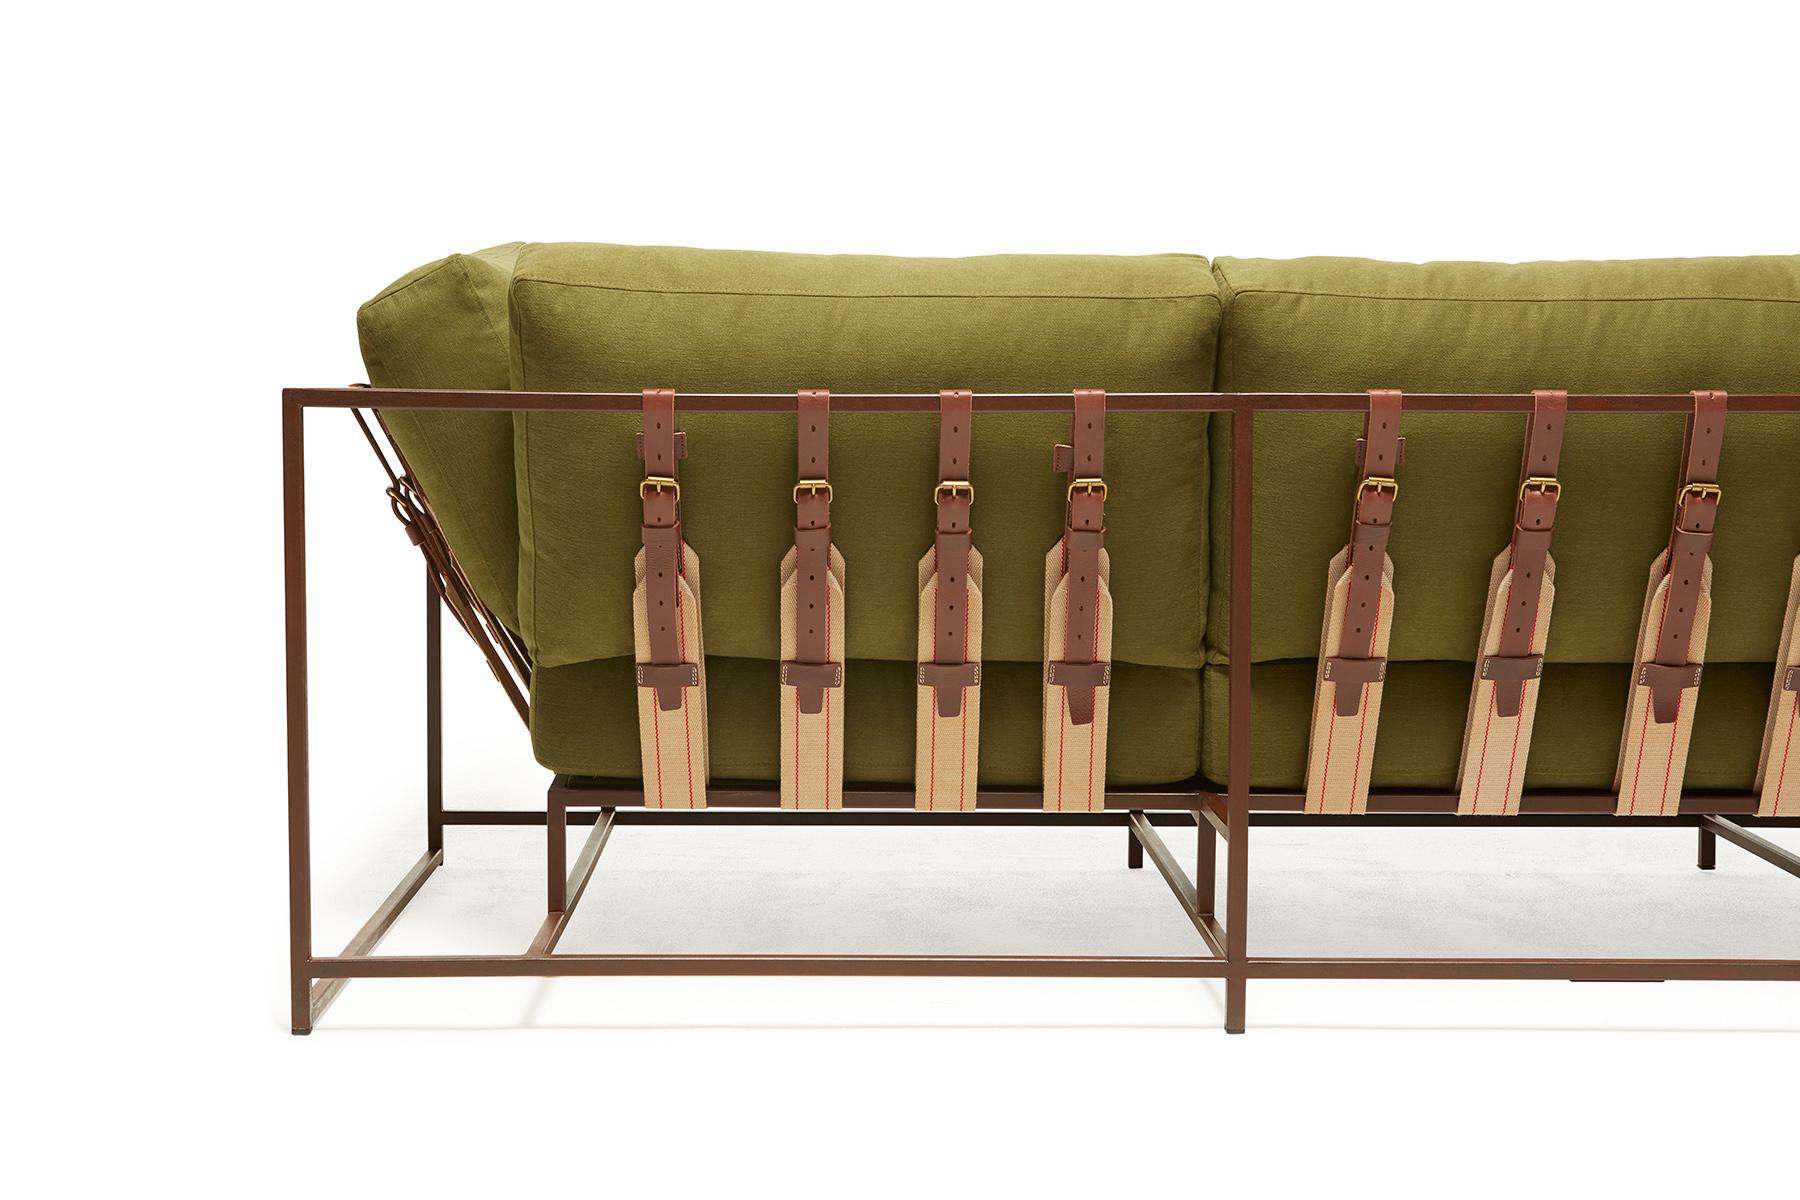 Metalwork Olive Twill Canvas and Marbled Rust Sofa For Sale